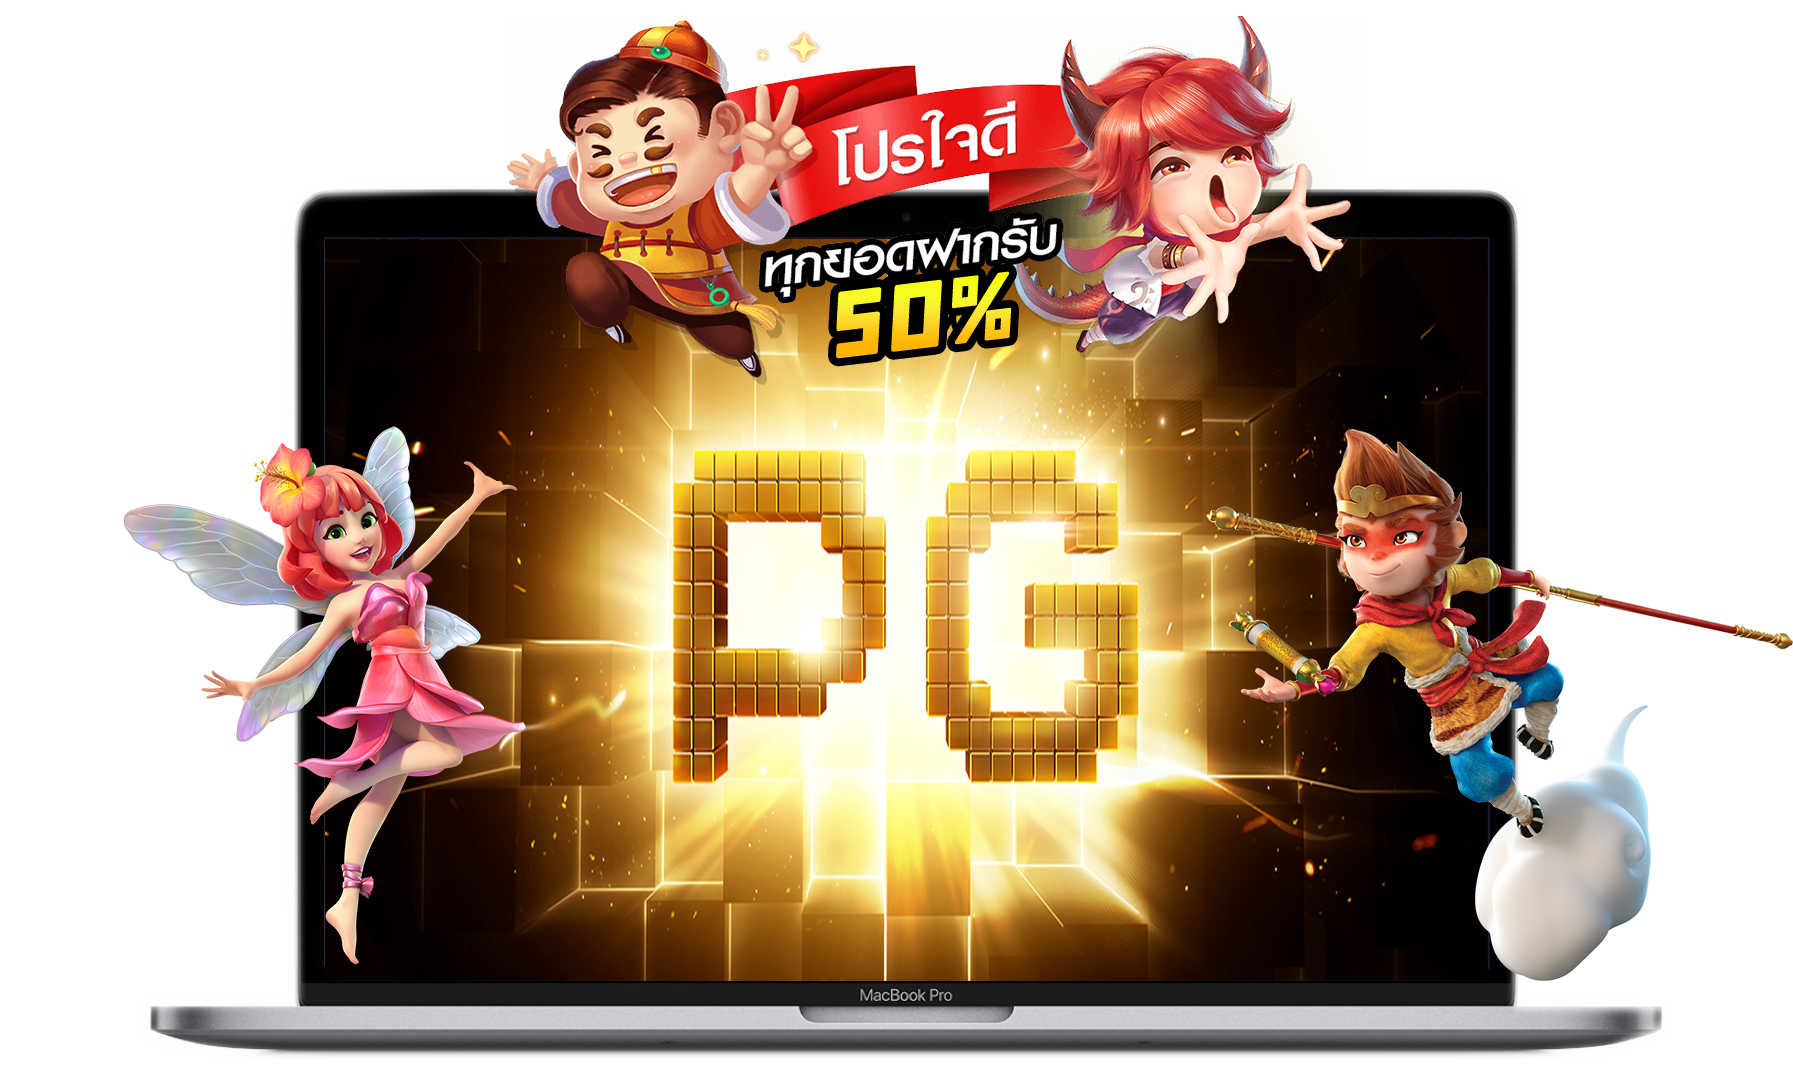 What Are The Pros Of Agen Poker Terpercaya? post thumbnail image